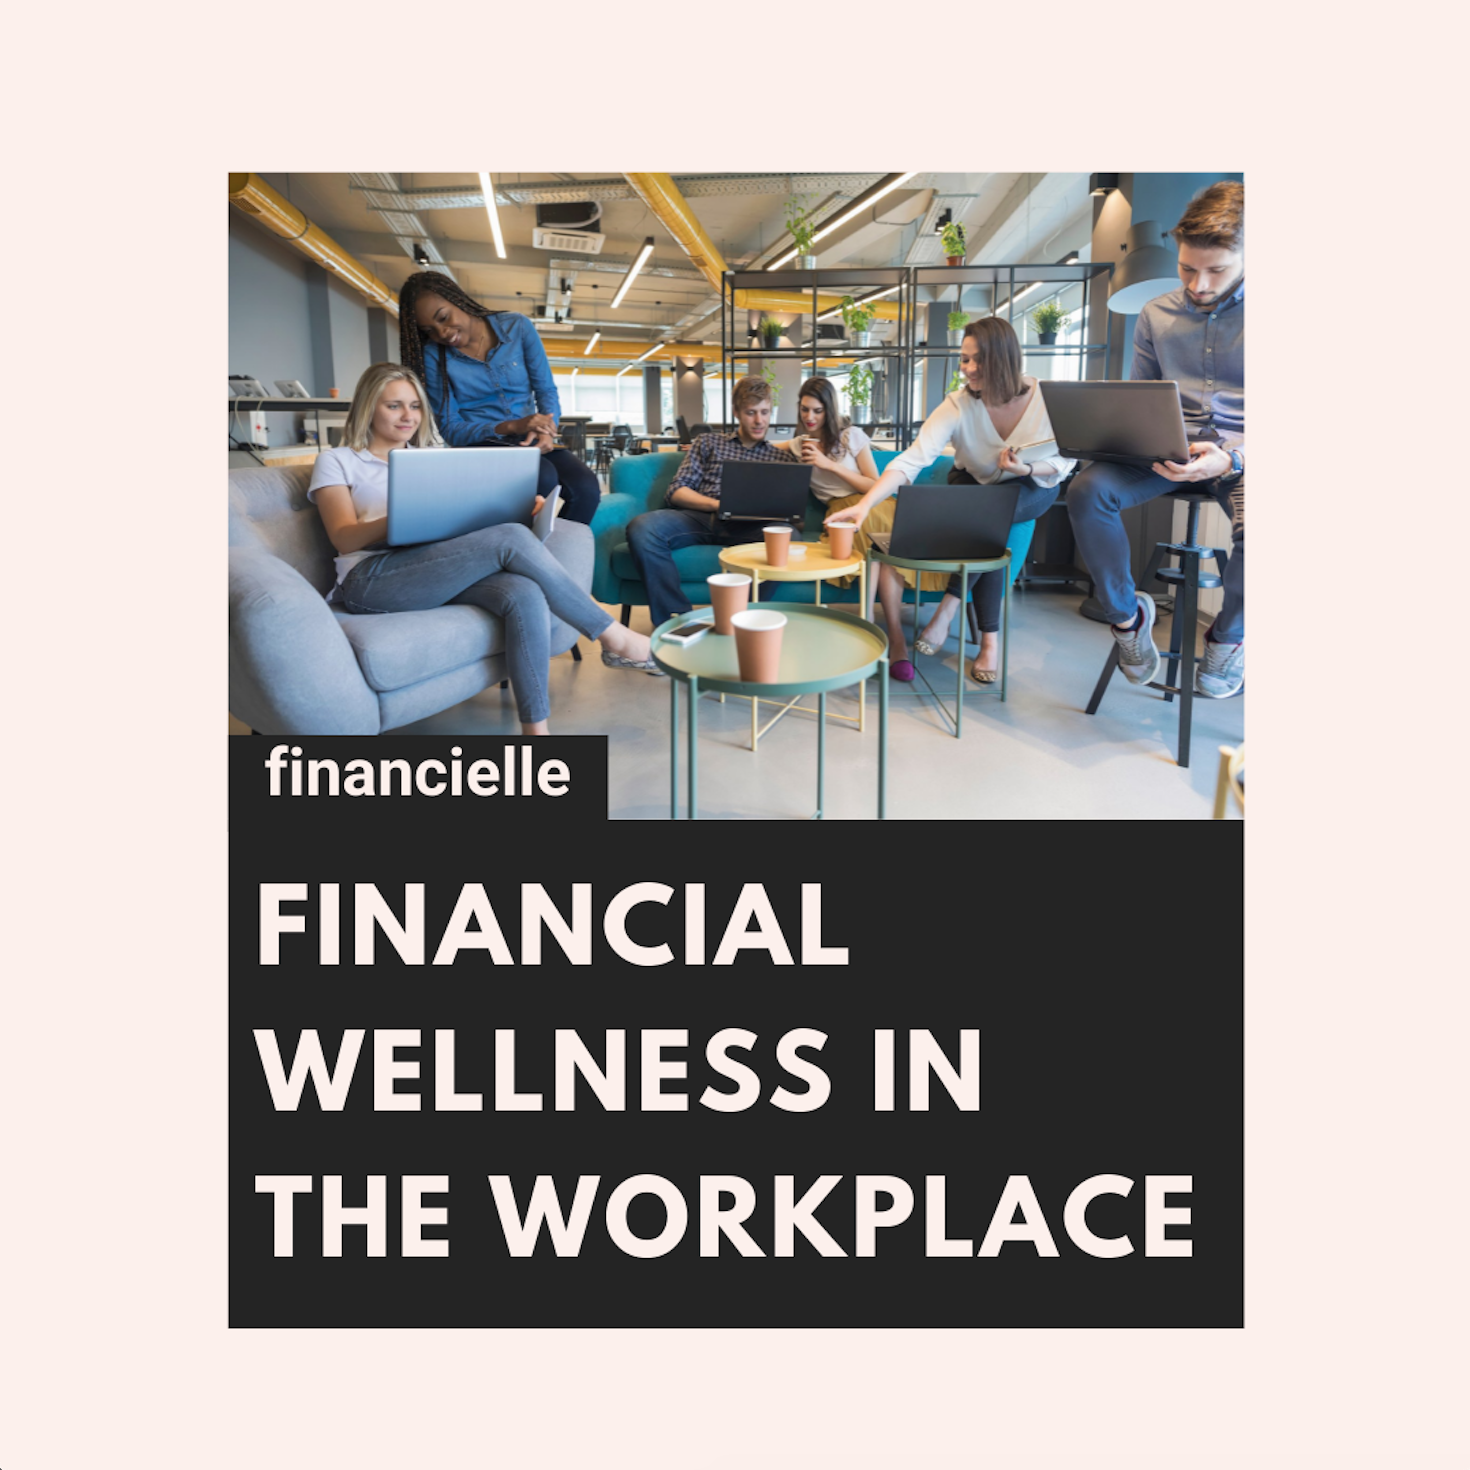 improve financial wellbeing index financial capability debt advice financial health retirement planning workplace wellbeing